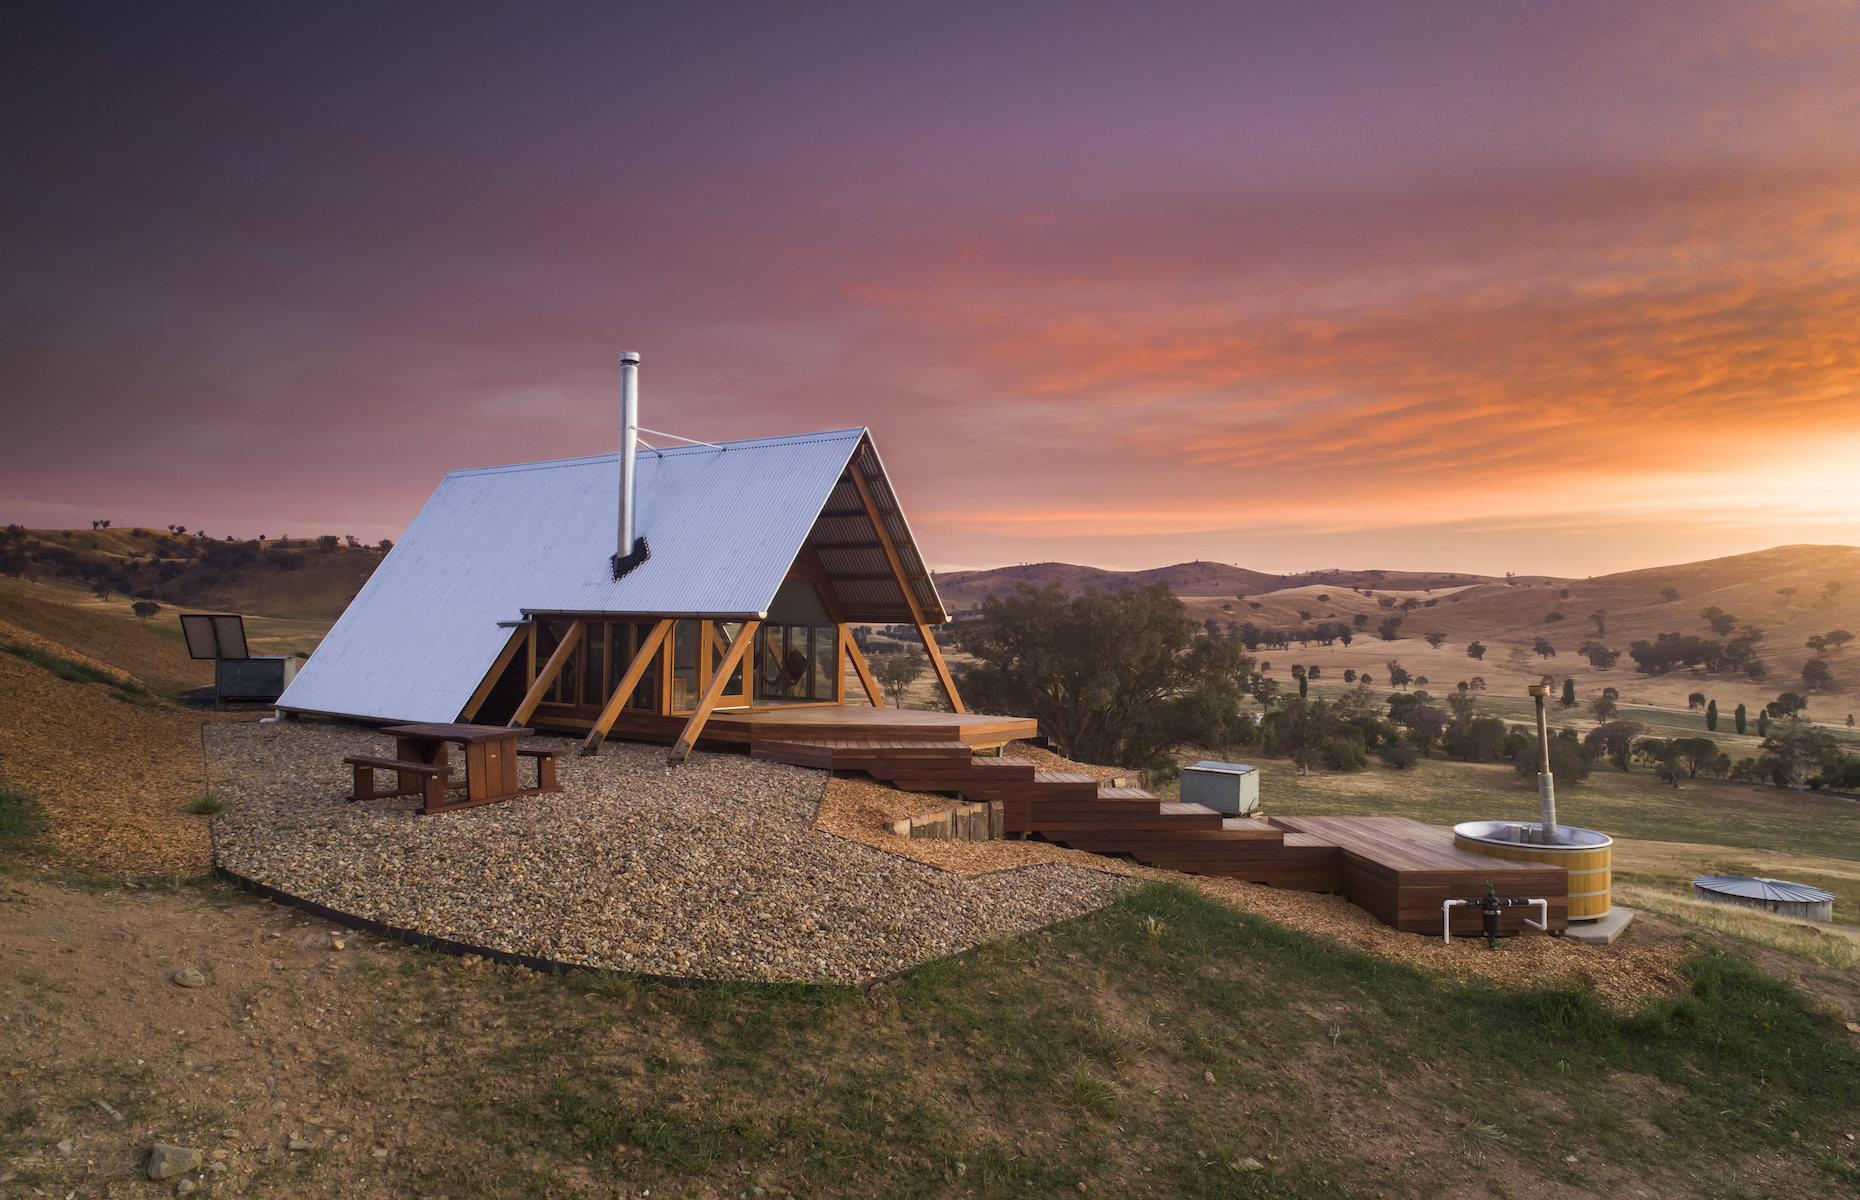 <p>Overlooking a 7,000-acre historic working sheep and cattle farm in rural New South Wales, these are <a href="https://www.kimoestate.com/accommodation-gundagai/">shepherd’s huts with a difference</a>. Exquisitely made using local timber, the double-bed spaces are sleek yet cozy with wood-burning stoves, wood-fired hot tubs, outside kitchens with barbecues and camp stoves, and wraparound views of the estate and the Murrambidgee River flat. Sweeneys (pictured) is the highest of the three properties, which are set well apart to ensure complete privacy.</p>